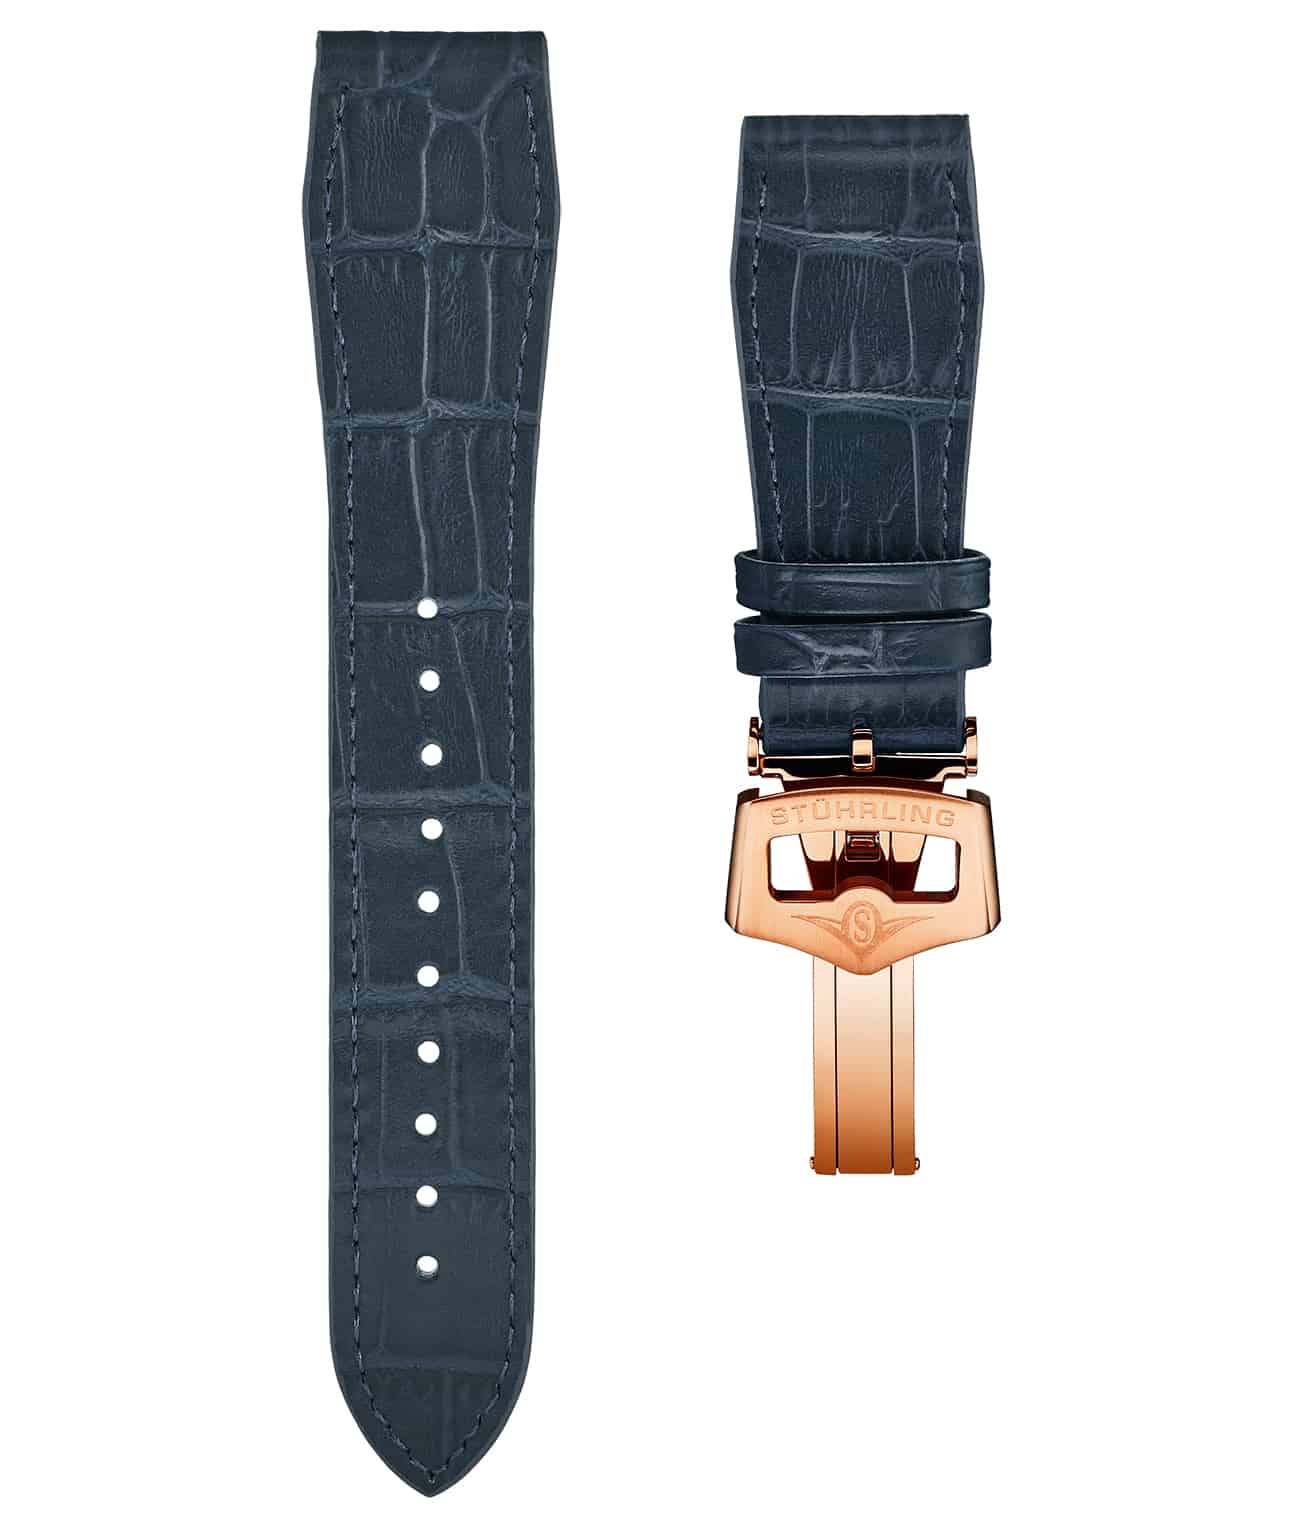 22mm Leather Strap with Stainless Steel Deployant Buckle